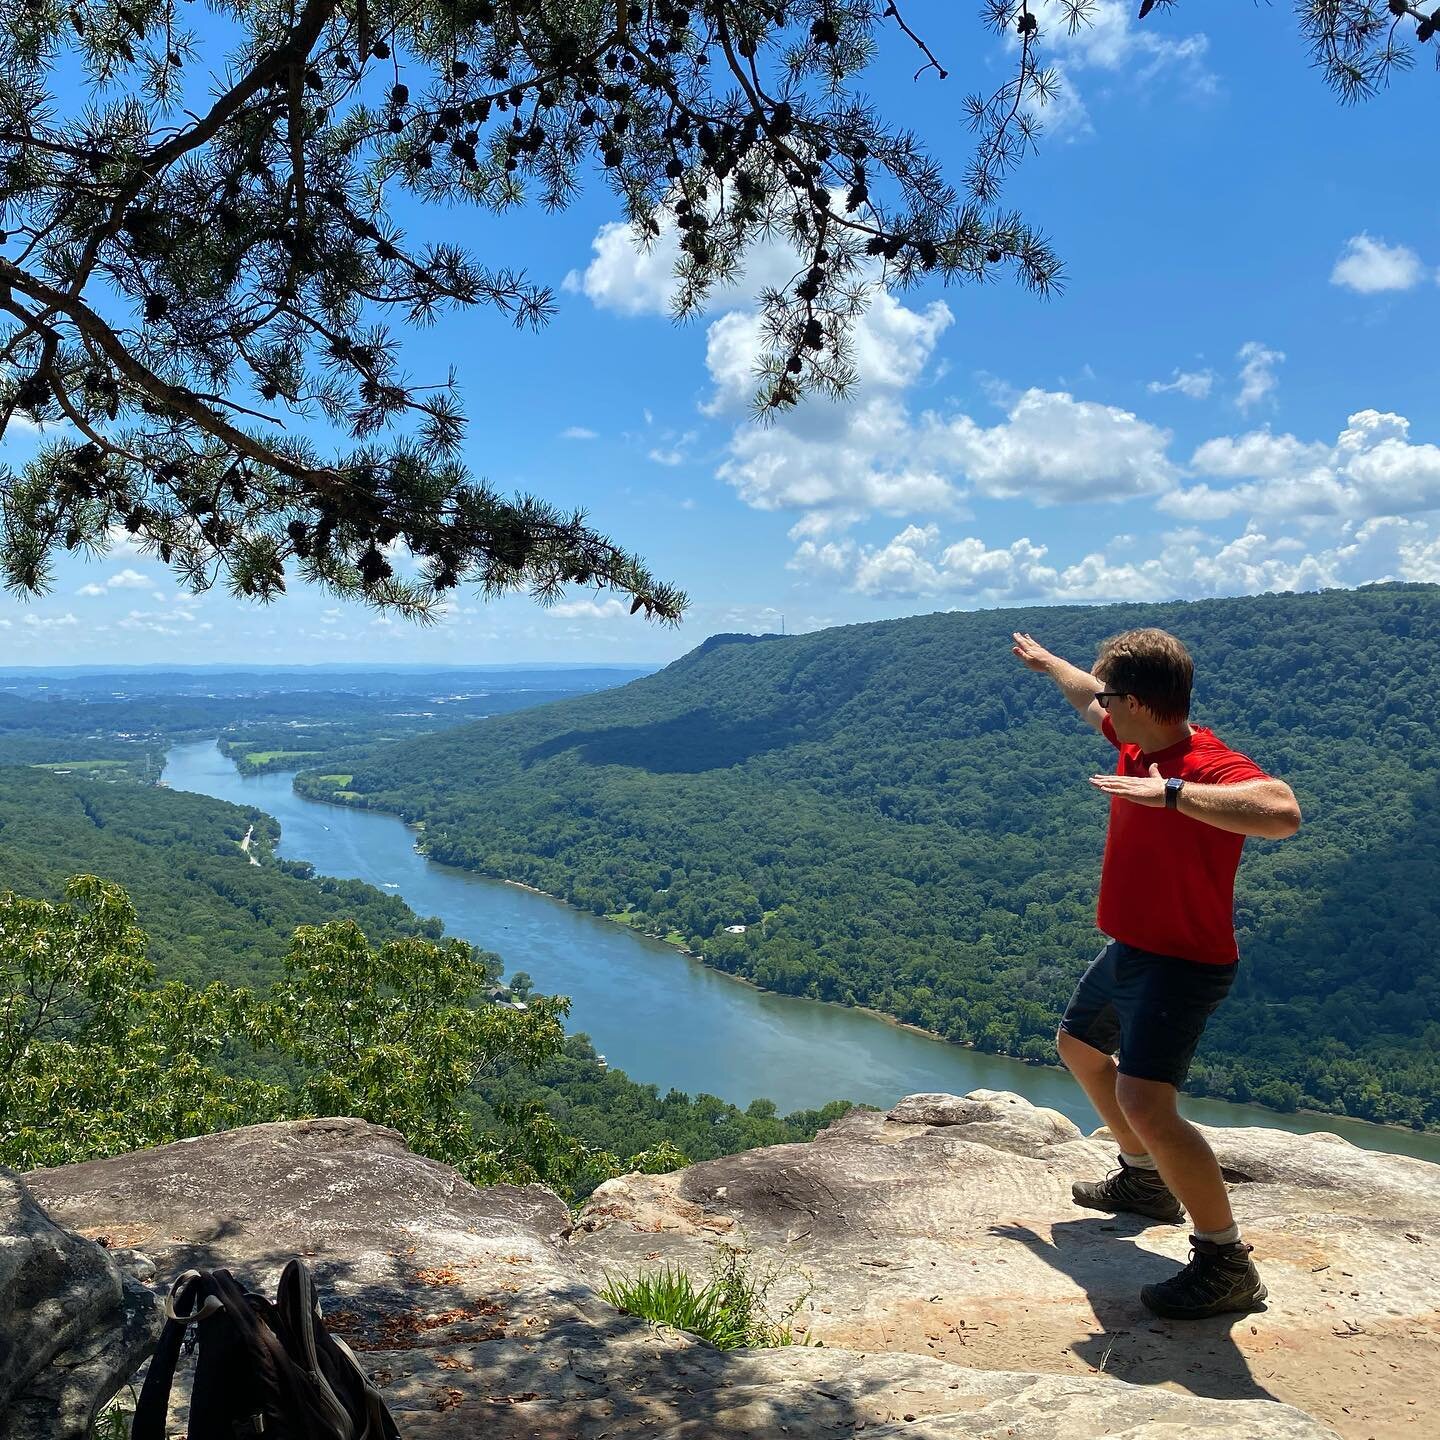 Fun day trip to Chattanooga, TN with my good friend @badgrover! Hiked 6ish miles along a forest covered ridge that gave some pretty sweet views of the Tennessee river and surrounding area. Gotta say, this hike kicked my butt. Hiking in the south duri